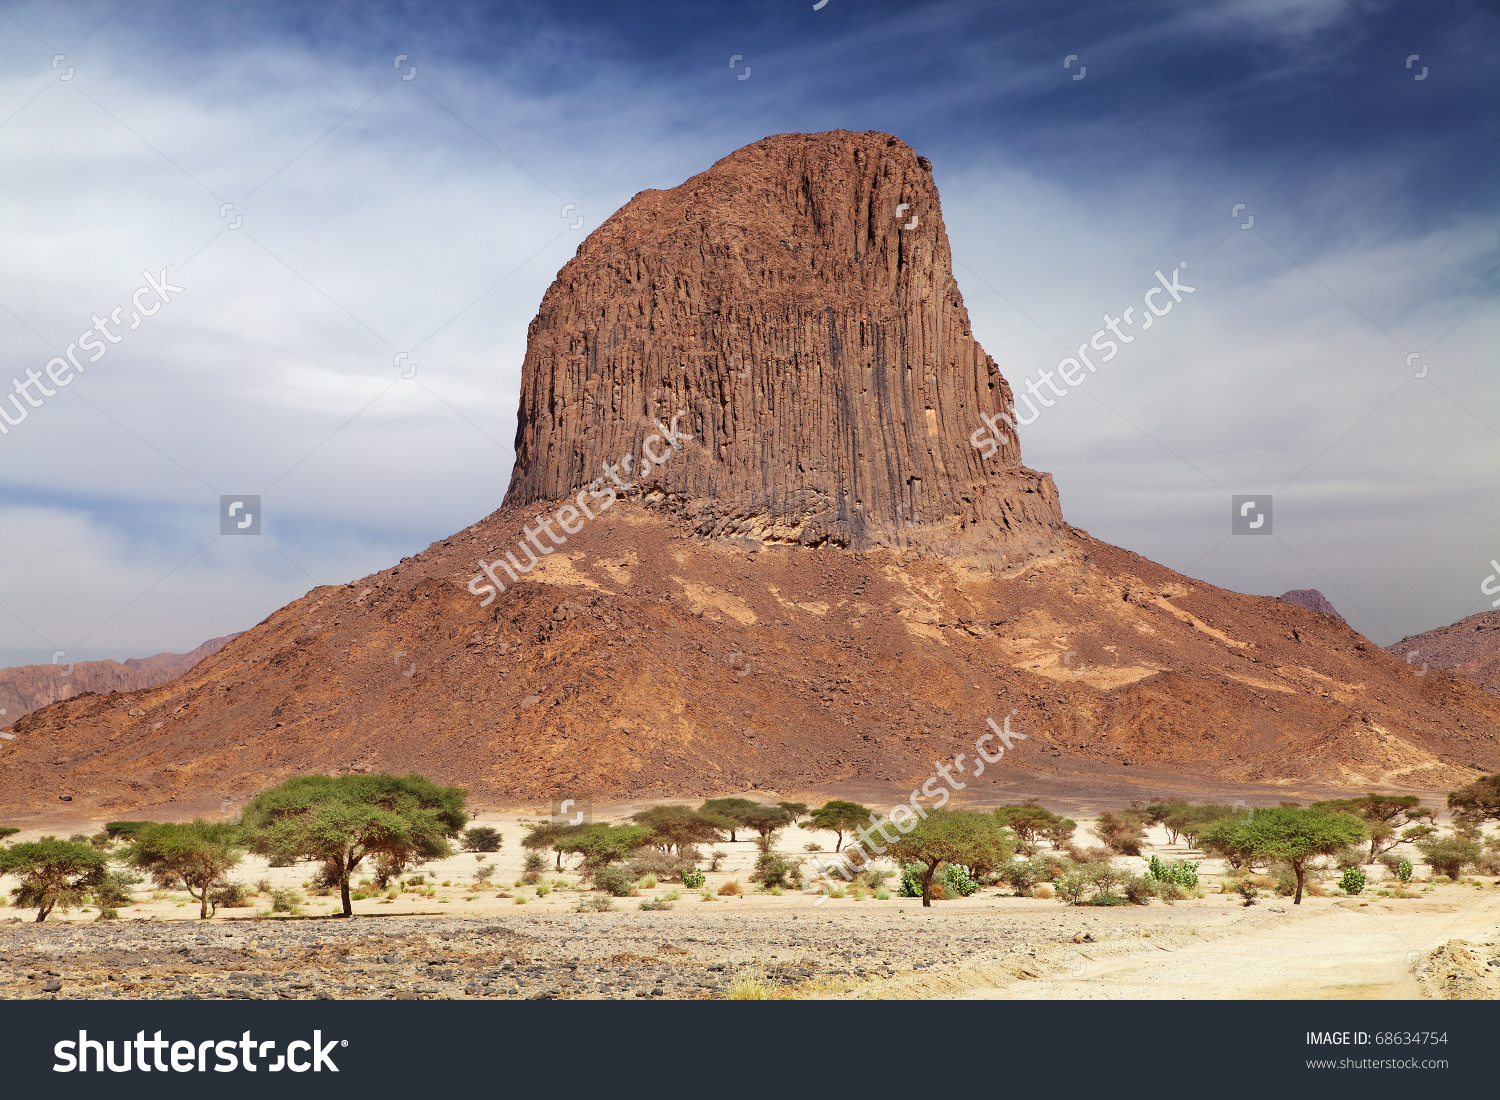 Hoggar Mountains clipart #1, Download drawings